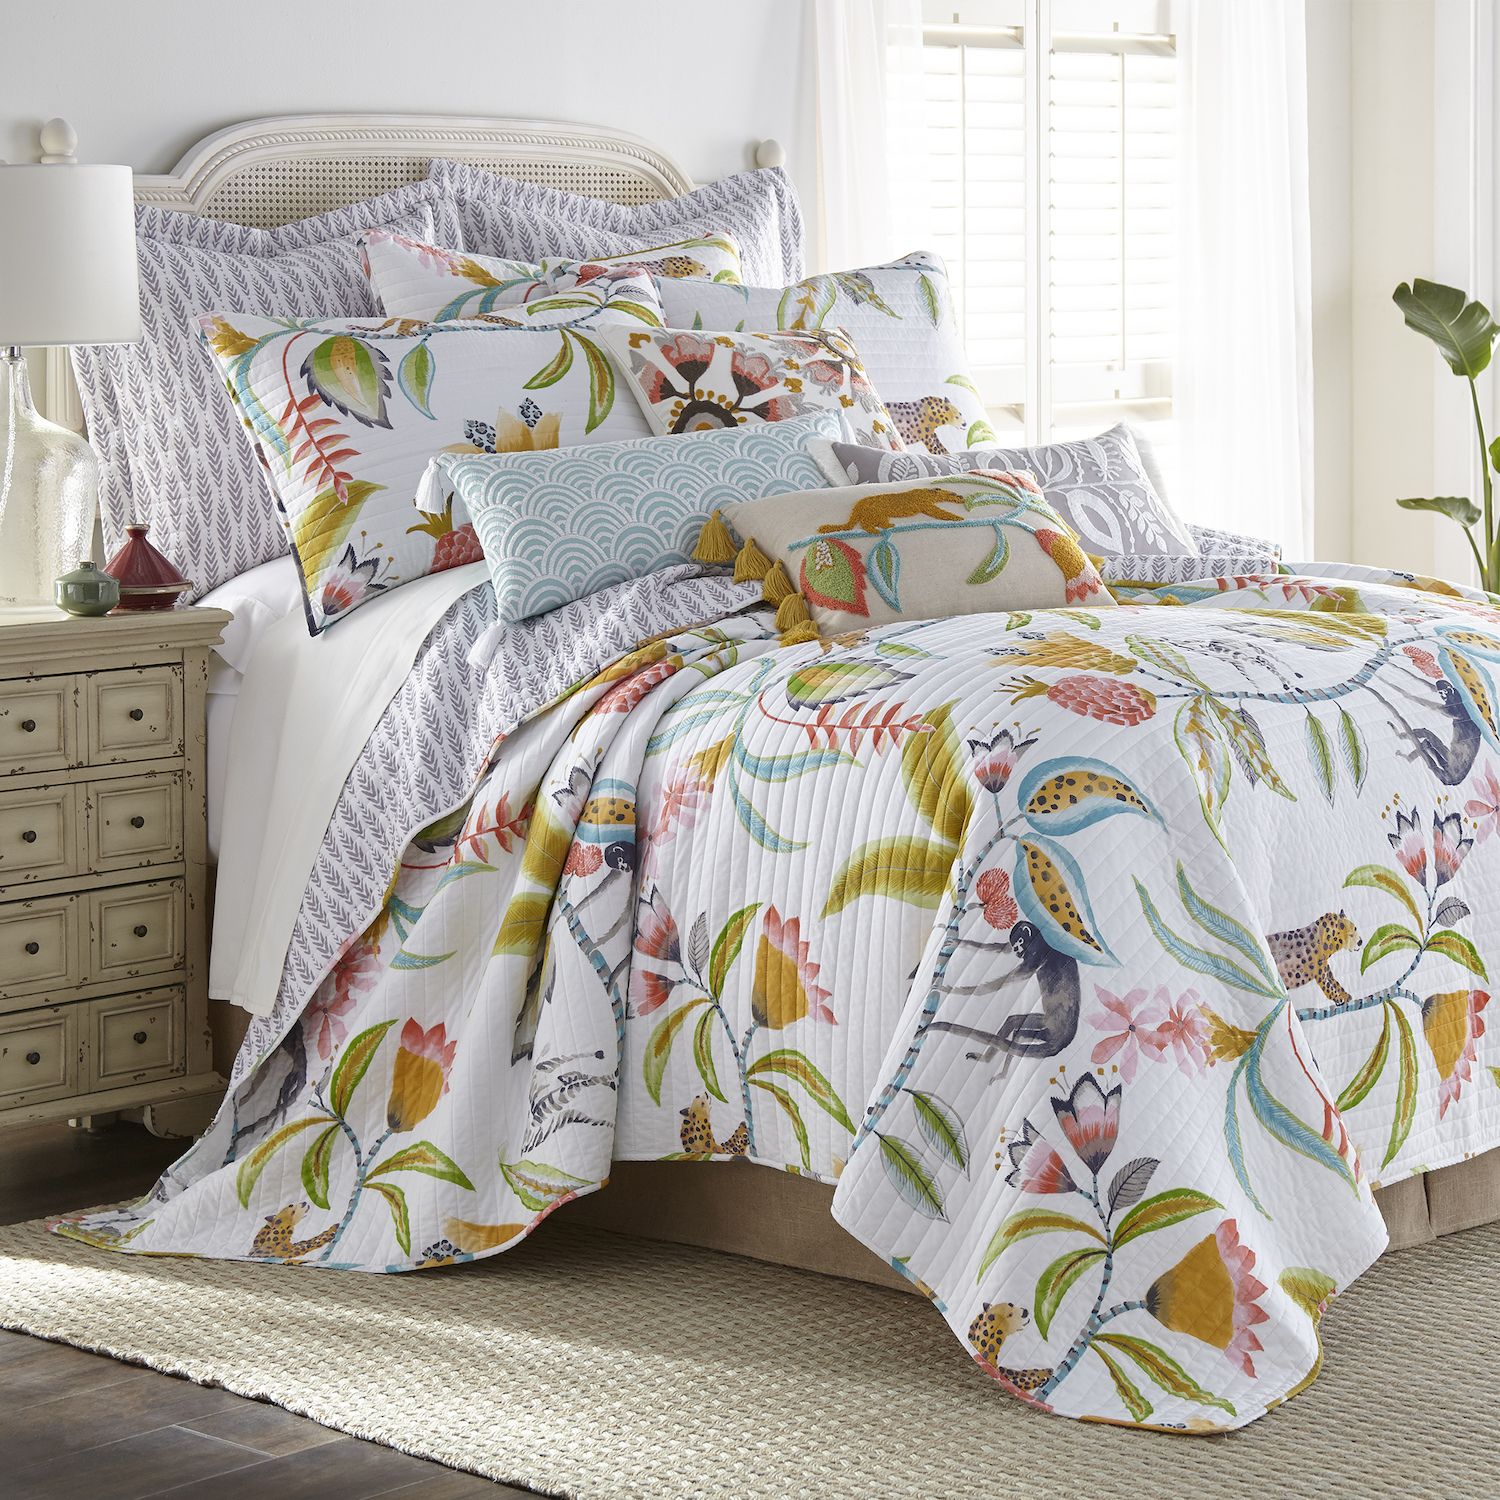 Image for Levtex Home Levtex Melina Quilt Set with Shams at Kohl's.